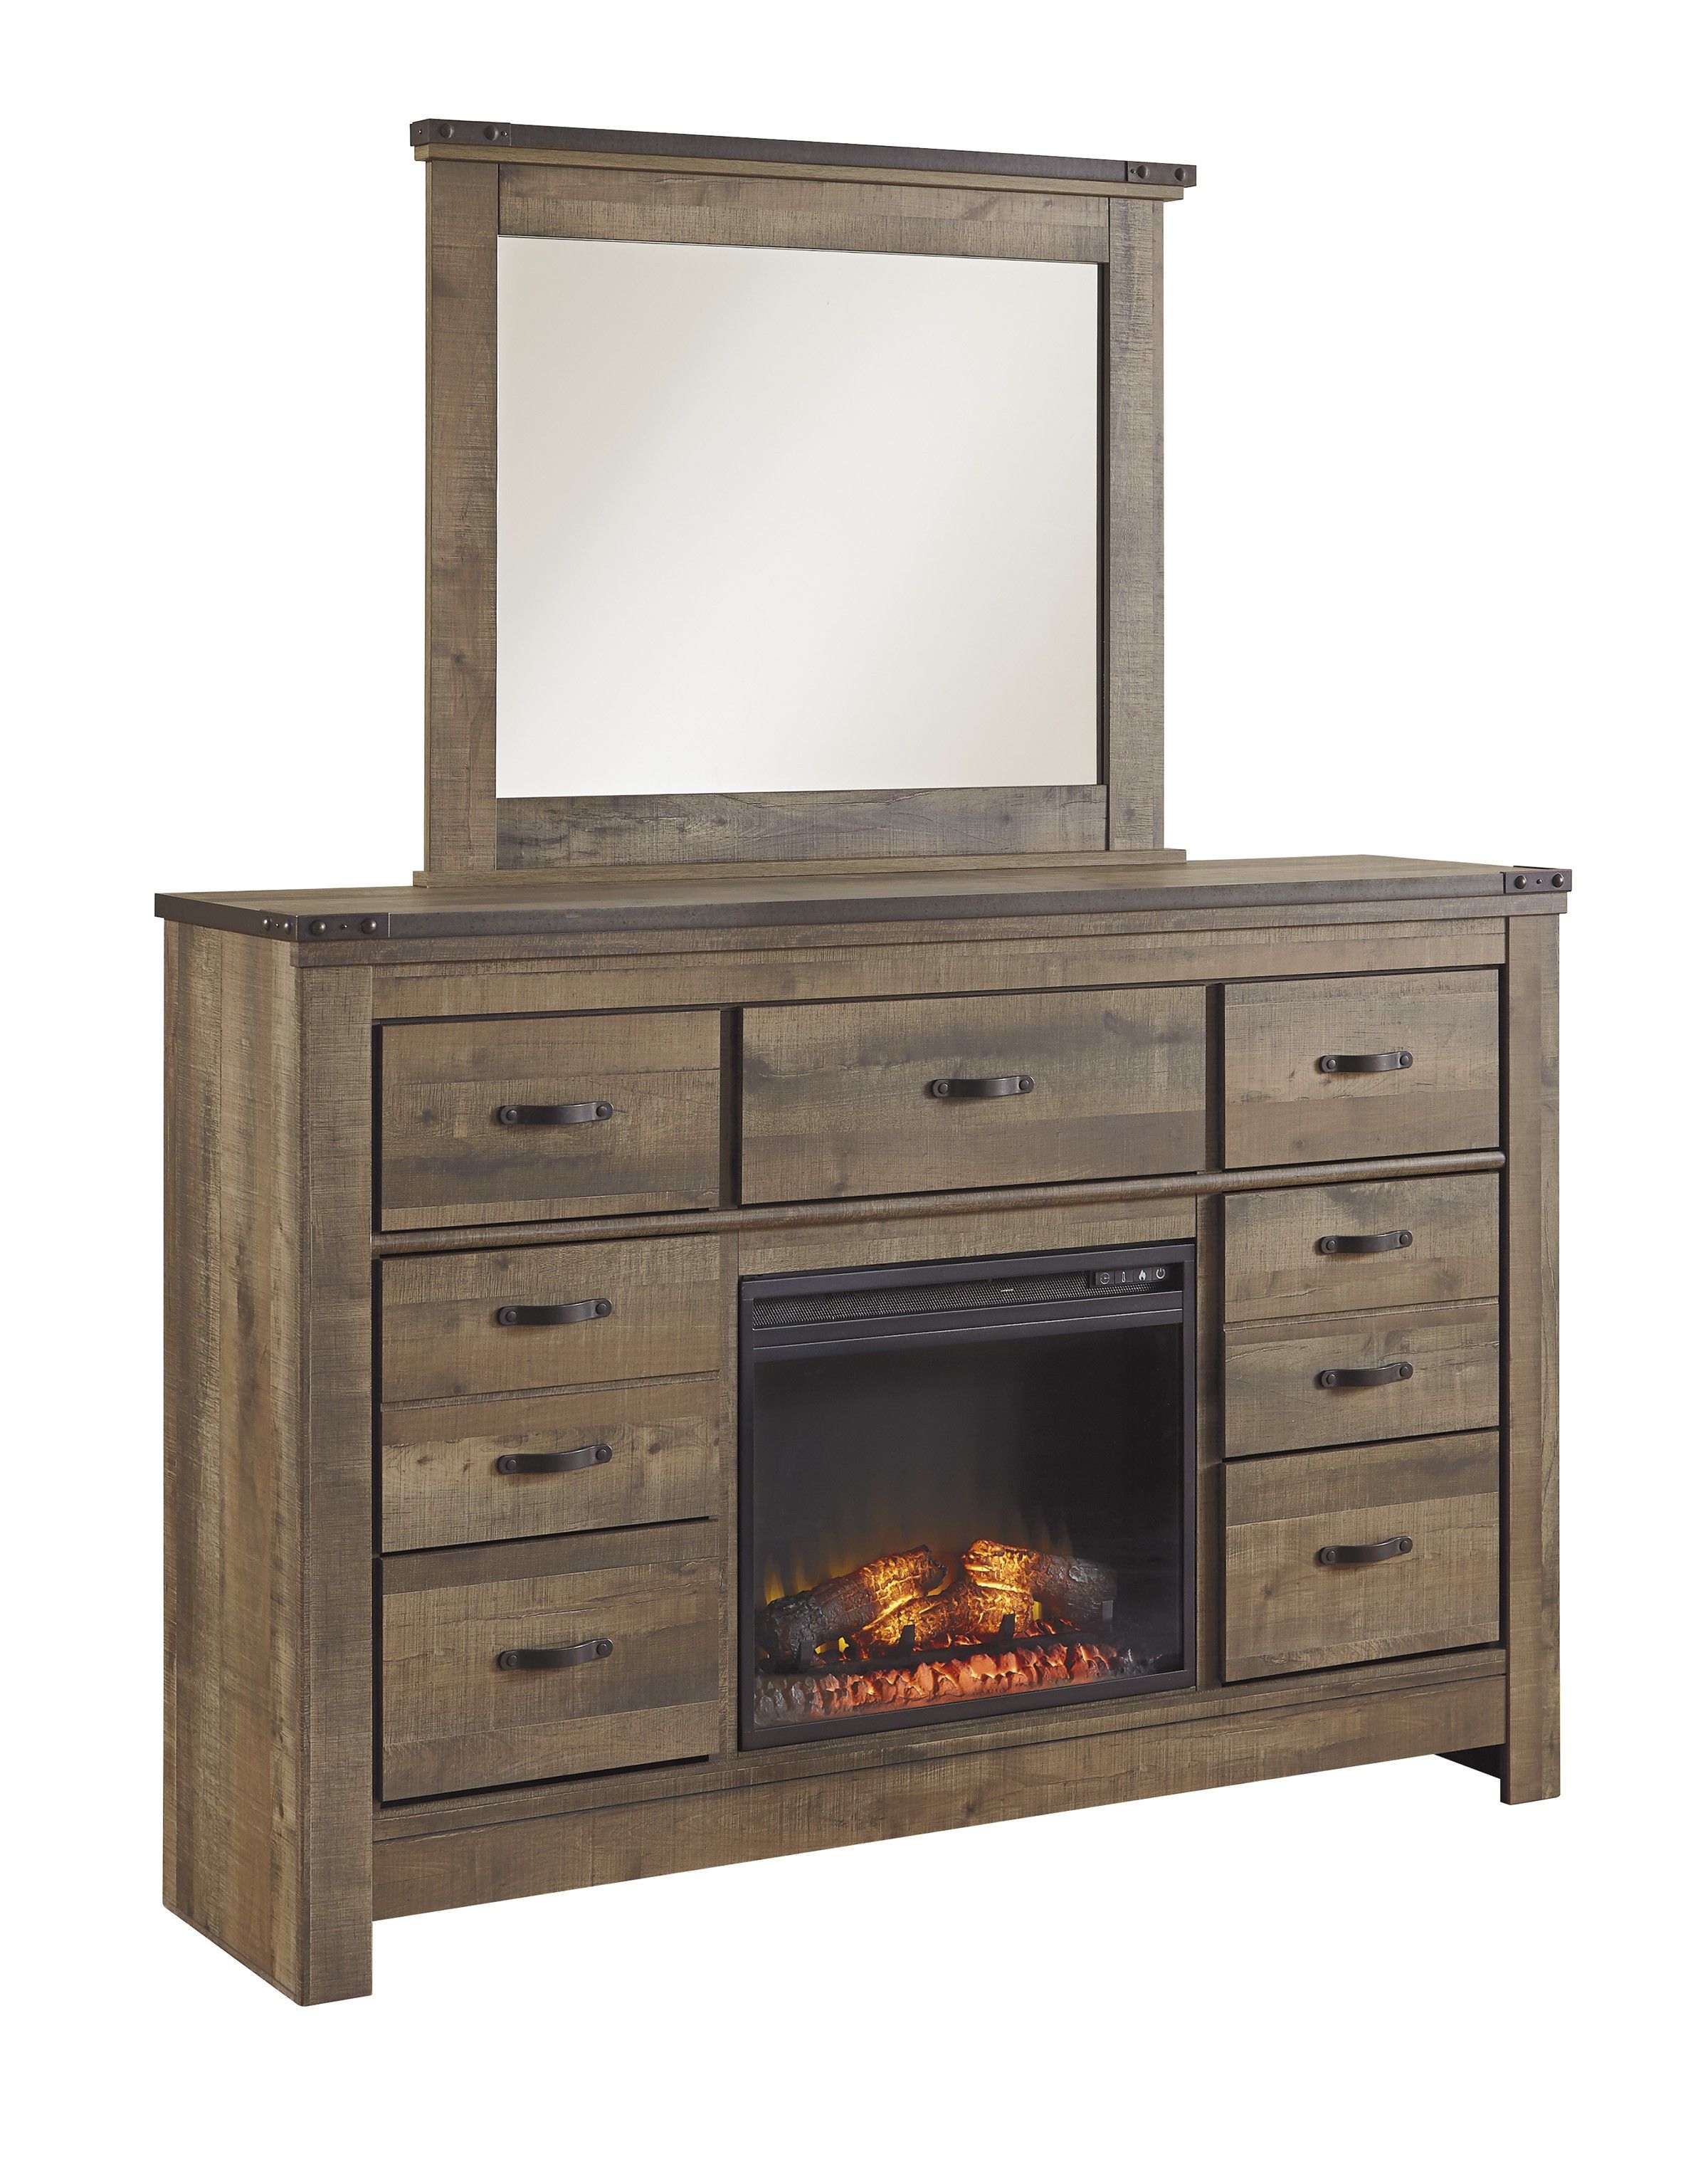 Electric Fireplace Dresser Best Of Signature Design by ashley B446 32